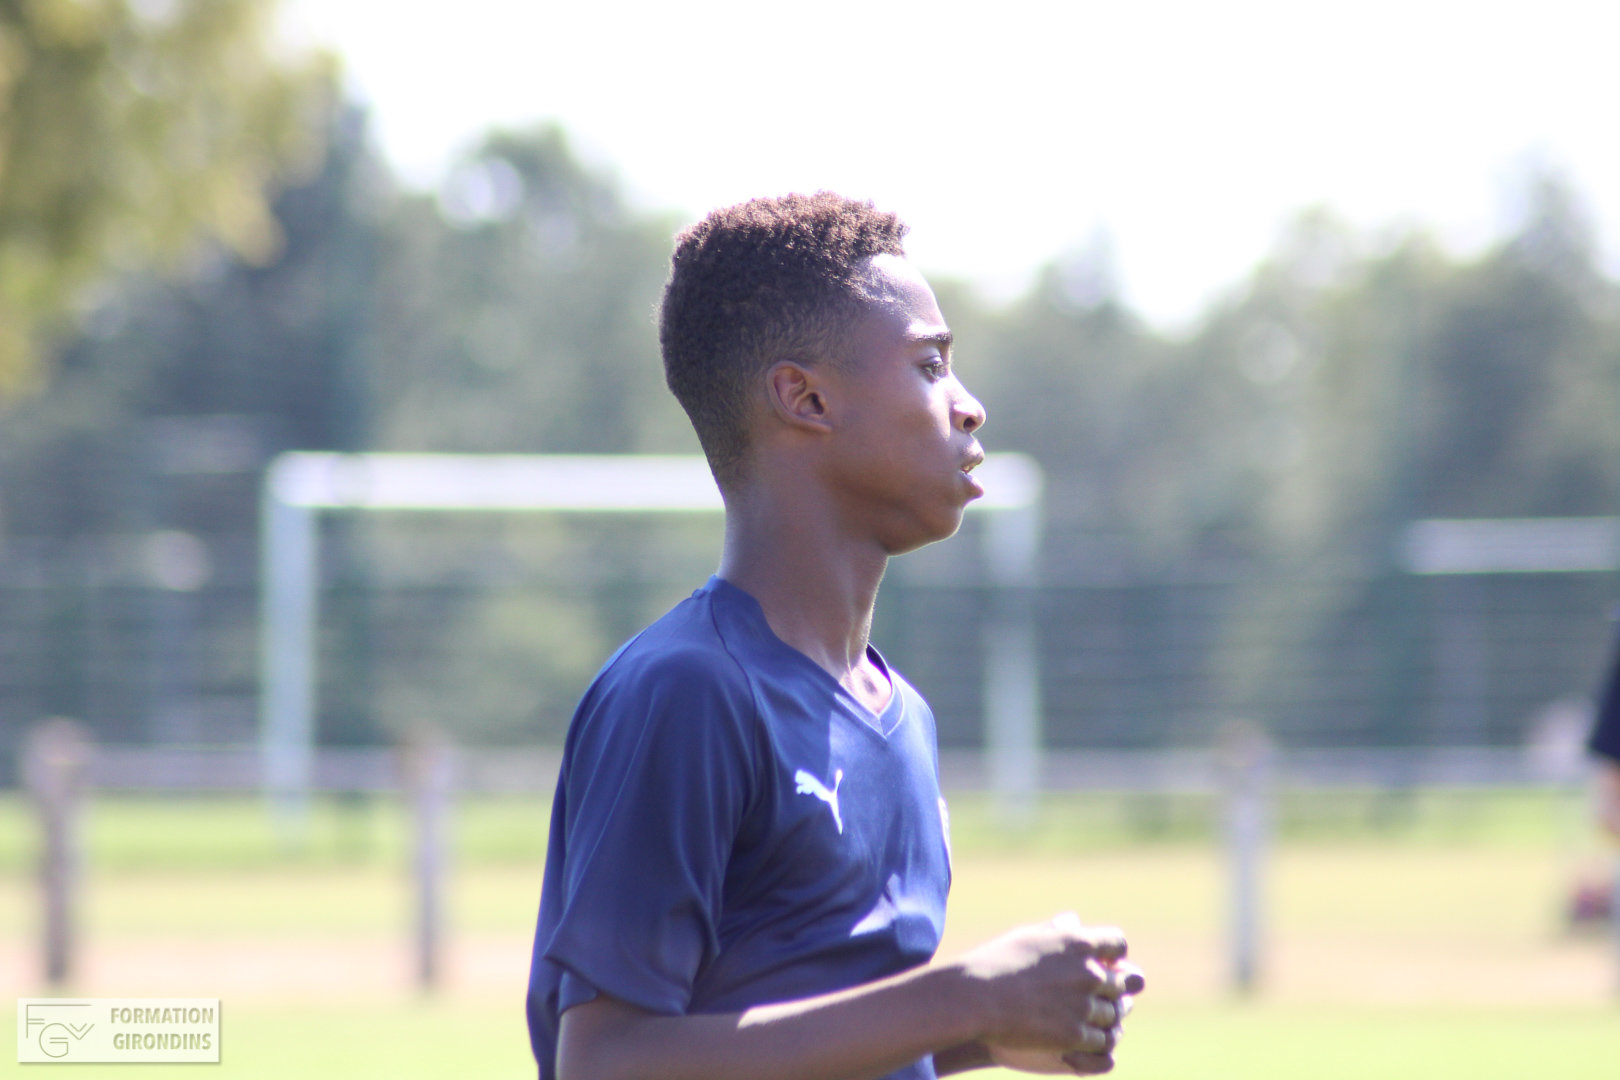 Cfa Girondins : Large victoire pour le premier match amical - Formation Girondins 